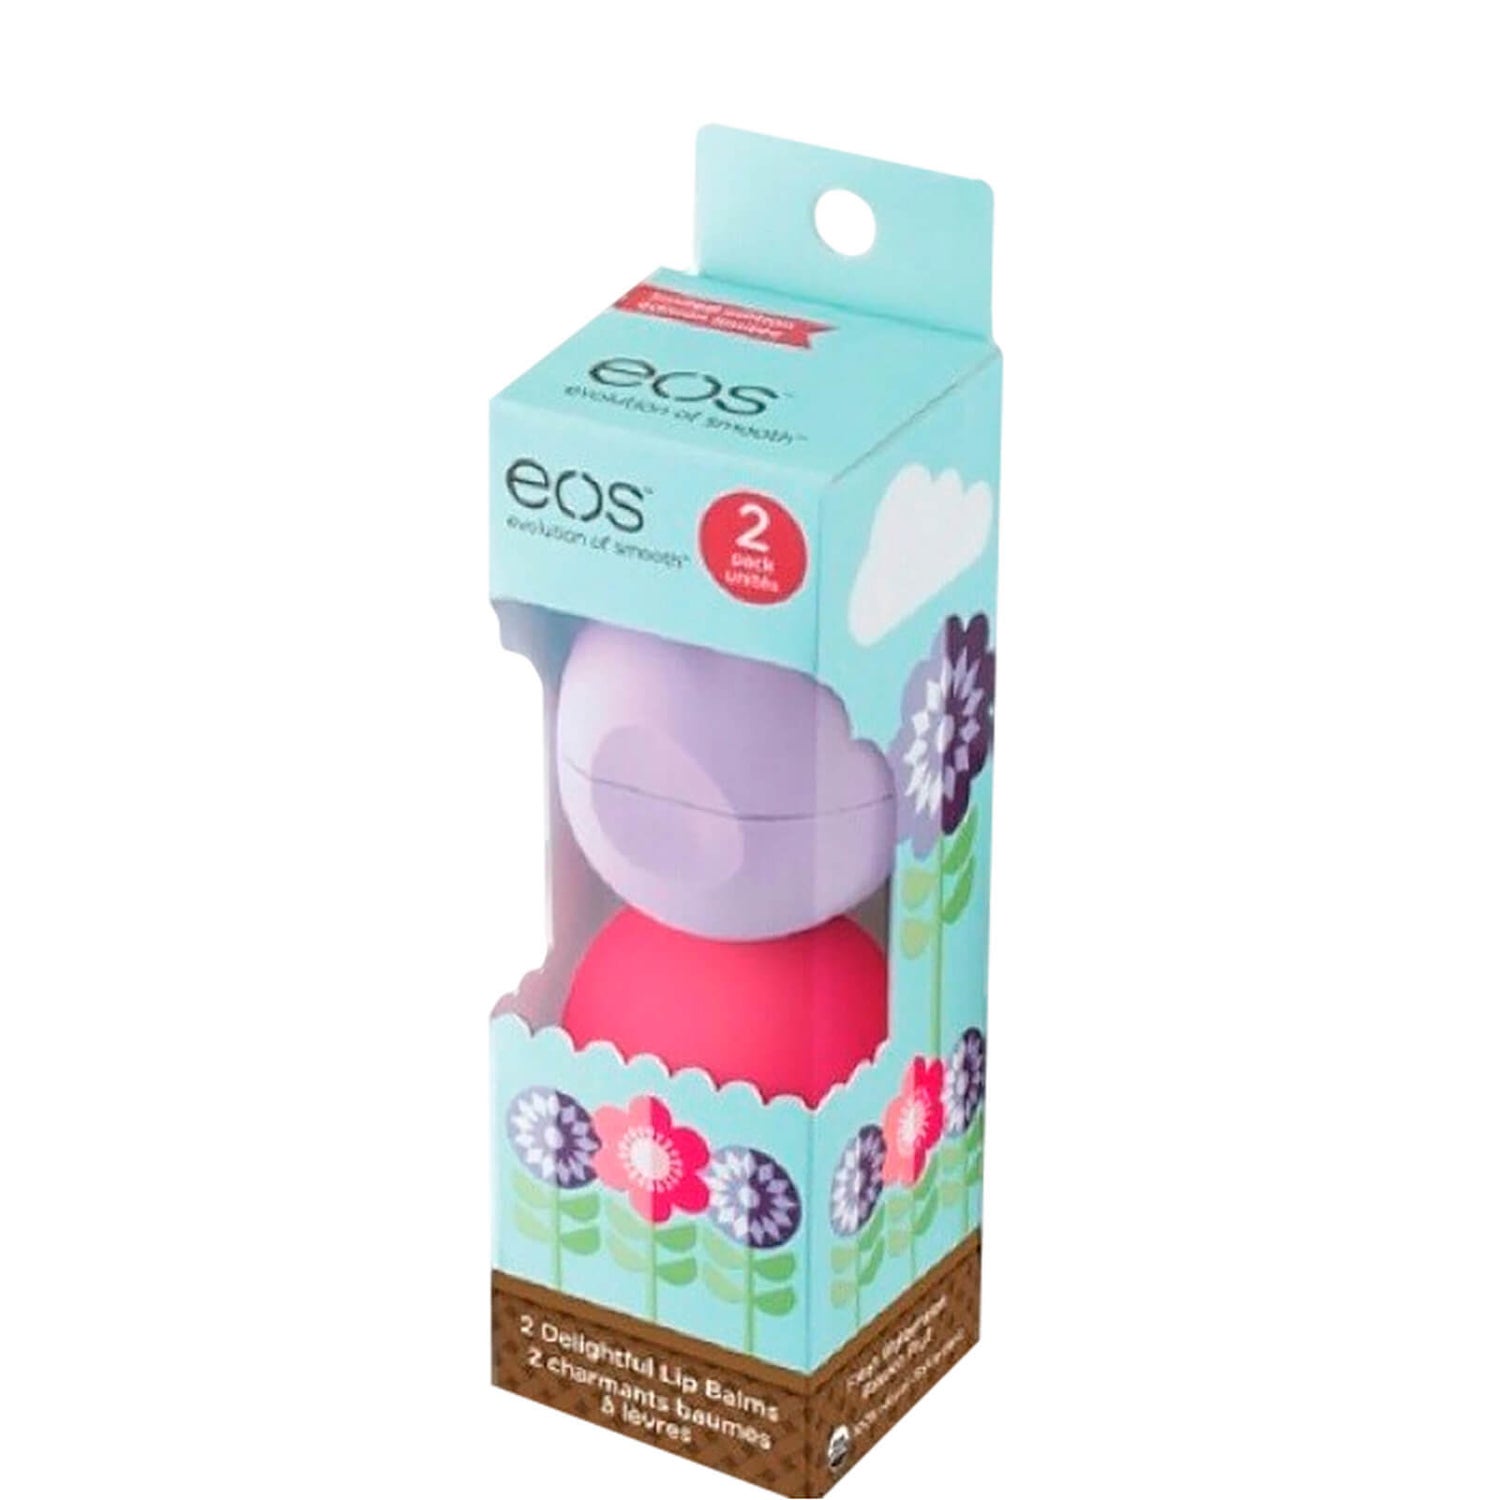 EOS Limited Edition Spring Duo